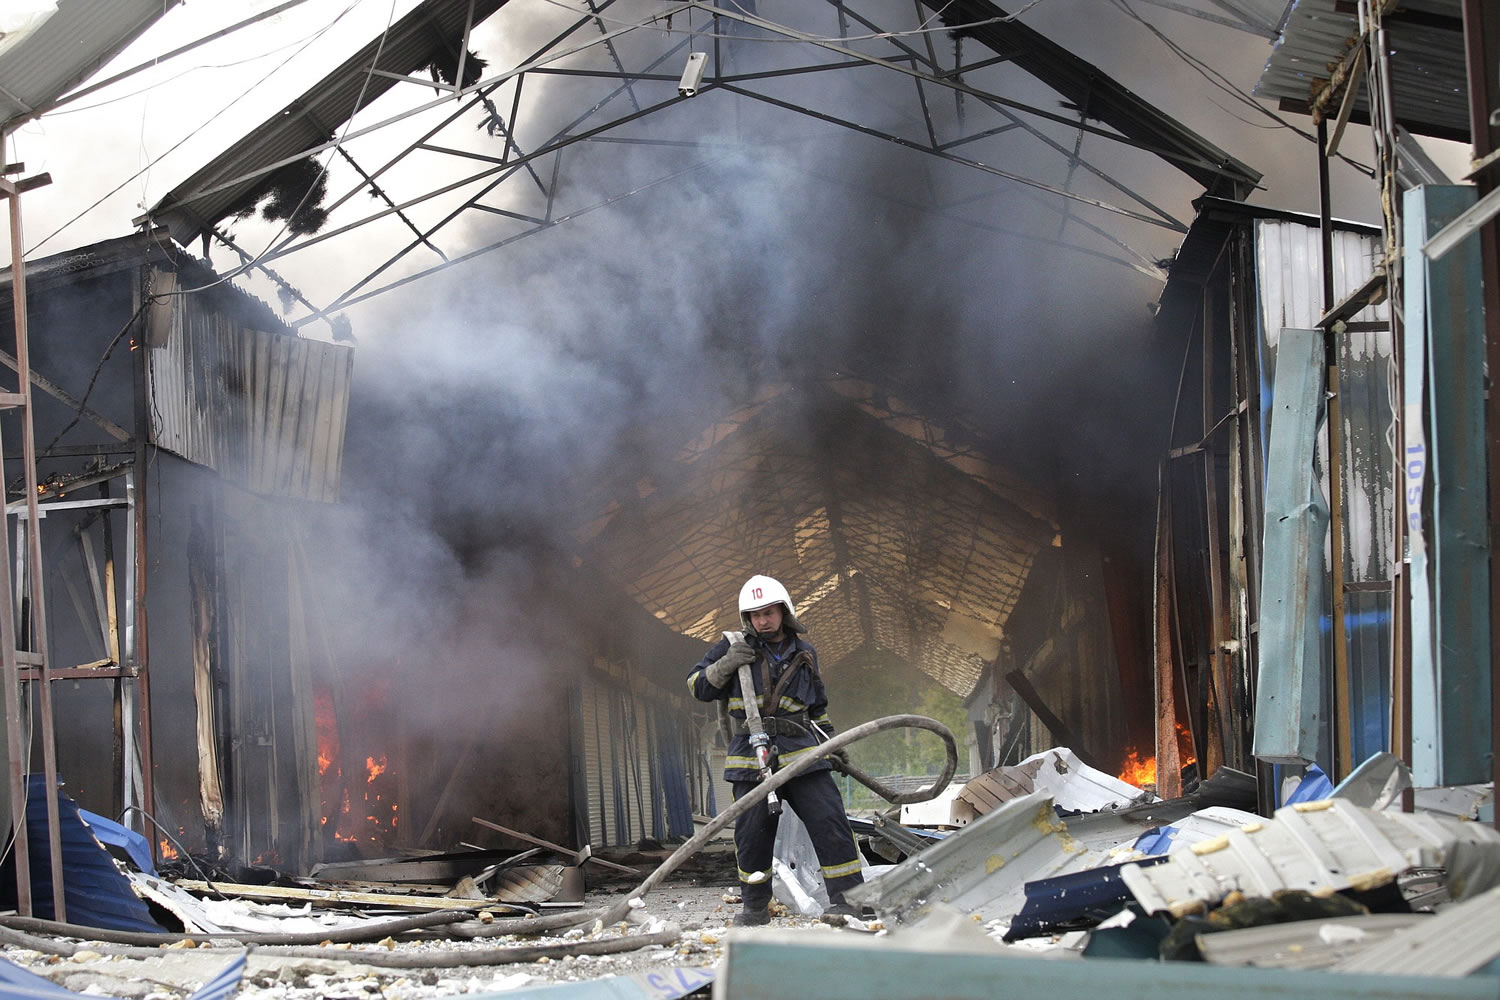 A firefighter works to put out a fire at a market that was destroyed after shelling Wednesday in Donetsk, Ukraine.